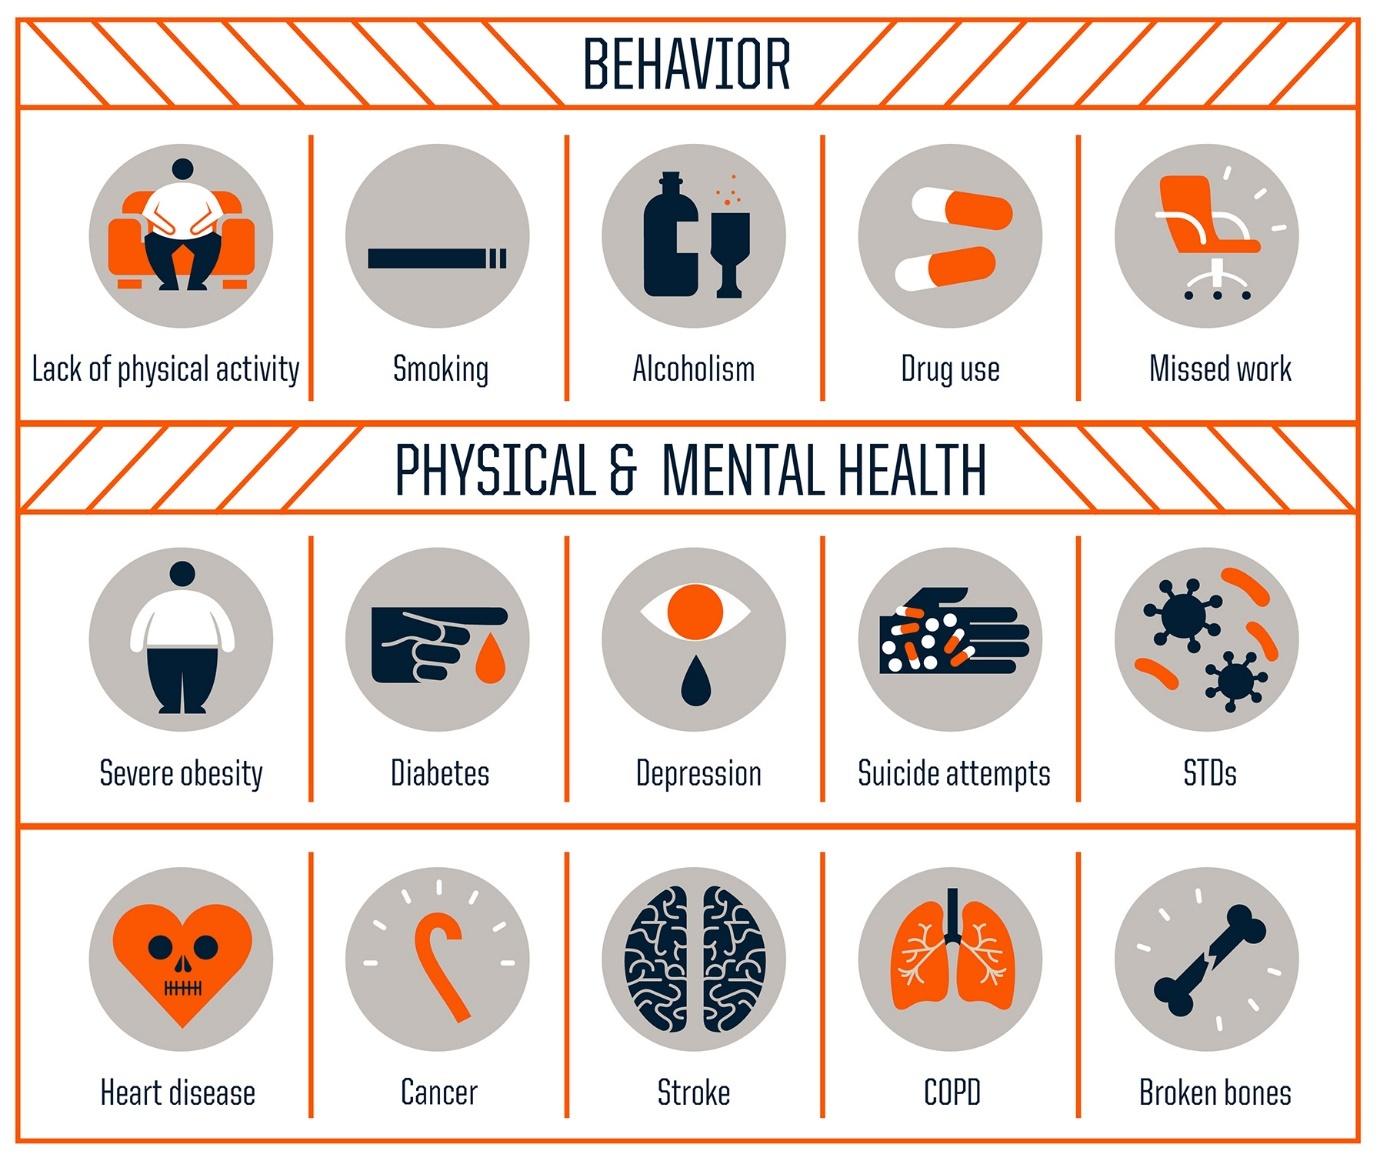 Behaviors and physical and mental health conditions